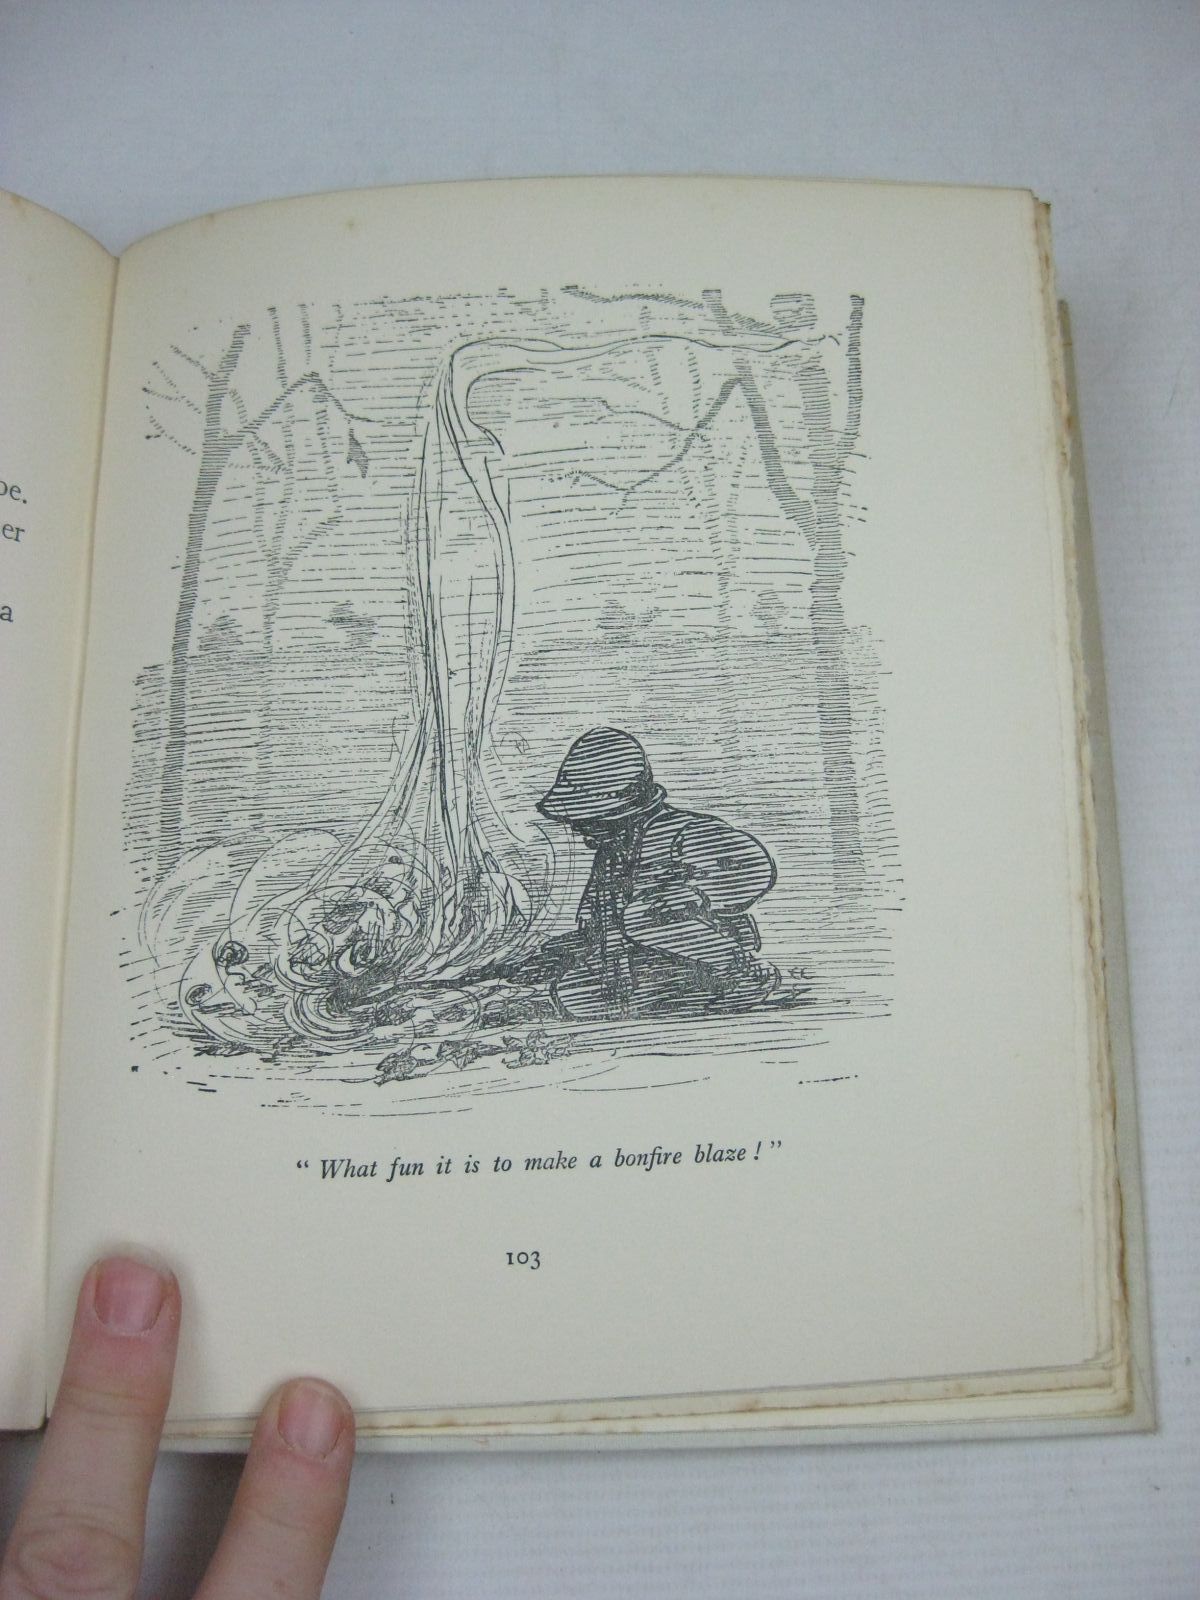 Photo of SILVER AND GOLD written by Blyton, Enid illustrated by Everett, Ethel F. published by Thomas Nelson and Sons Ltd. (STOCK CODE: 1506116)  for sale by Stella & Rose's Books